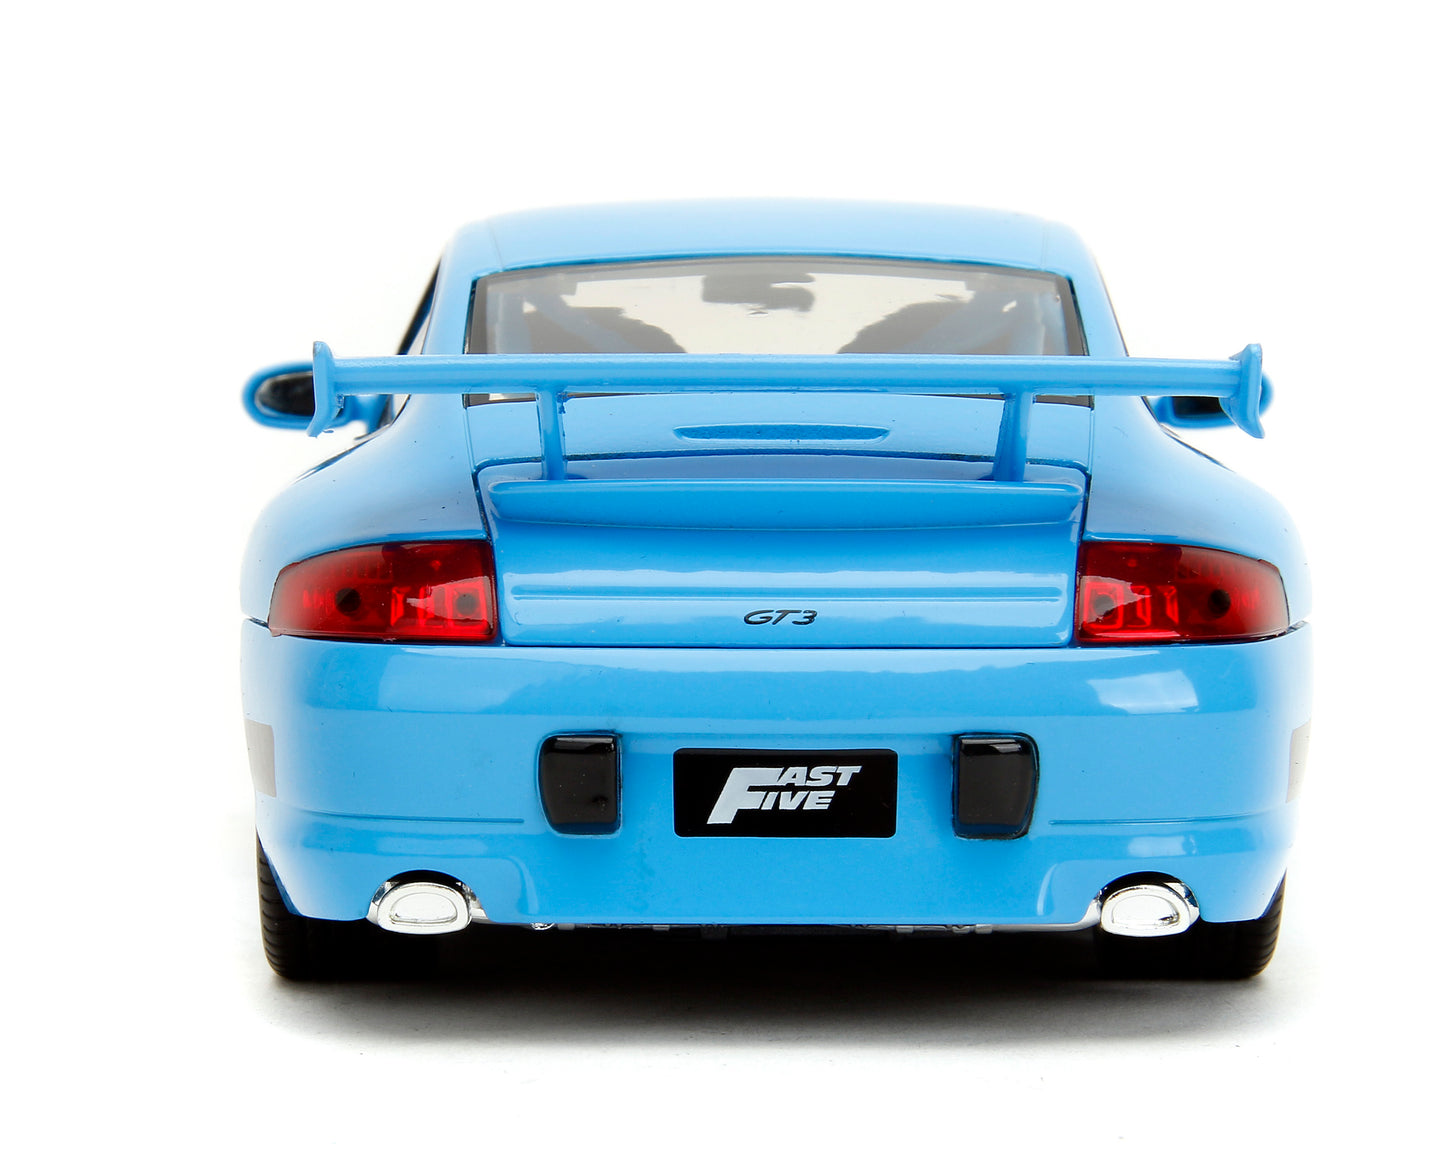 1:24 FF Brians Porsche 996 GT3 RS, Fast 5 (THIS IS A PREORDER)